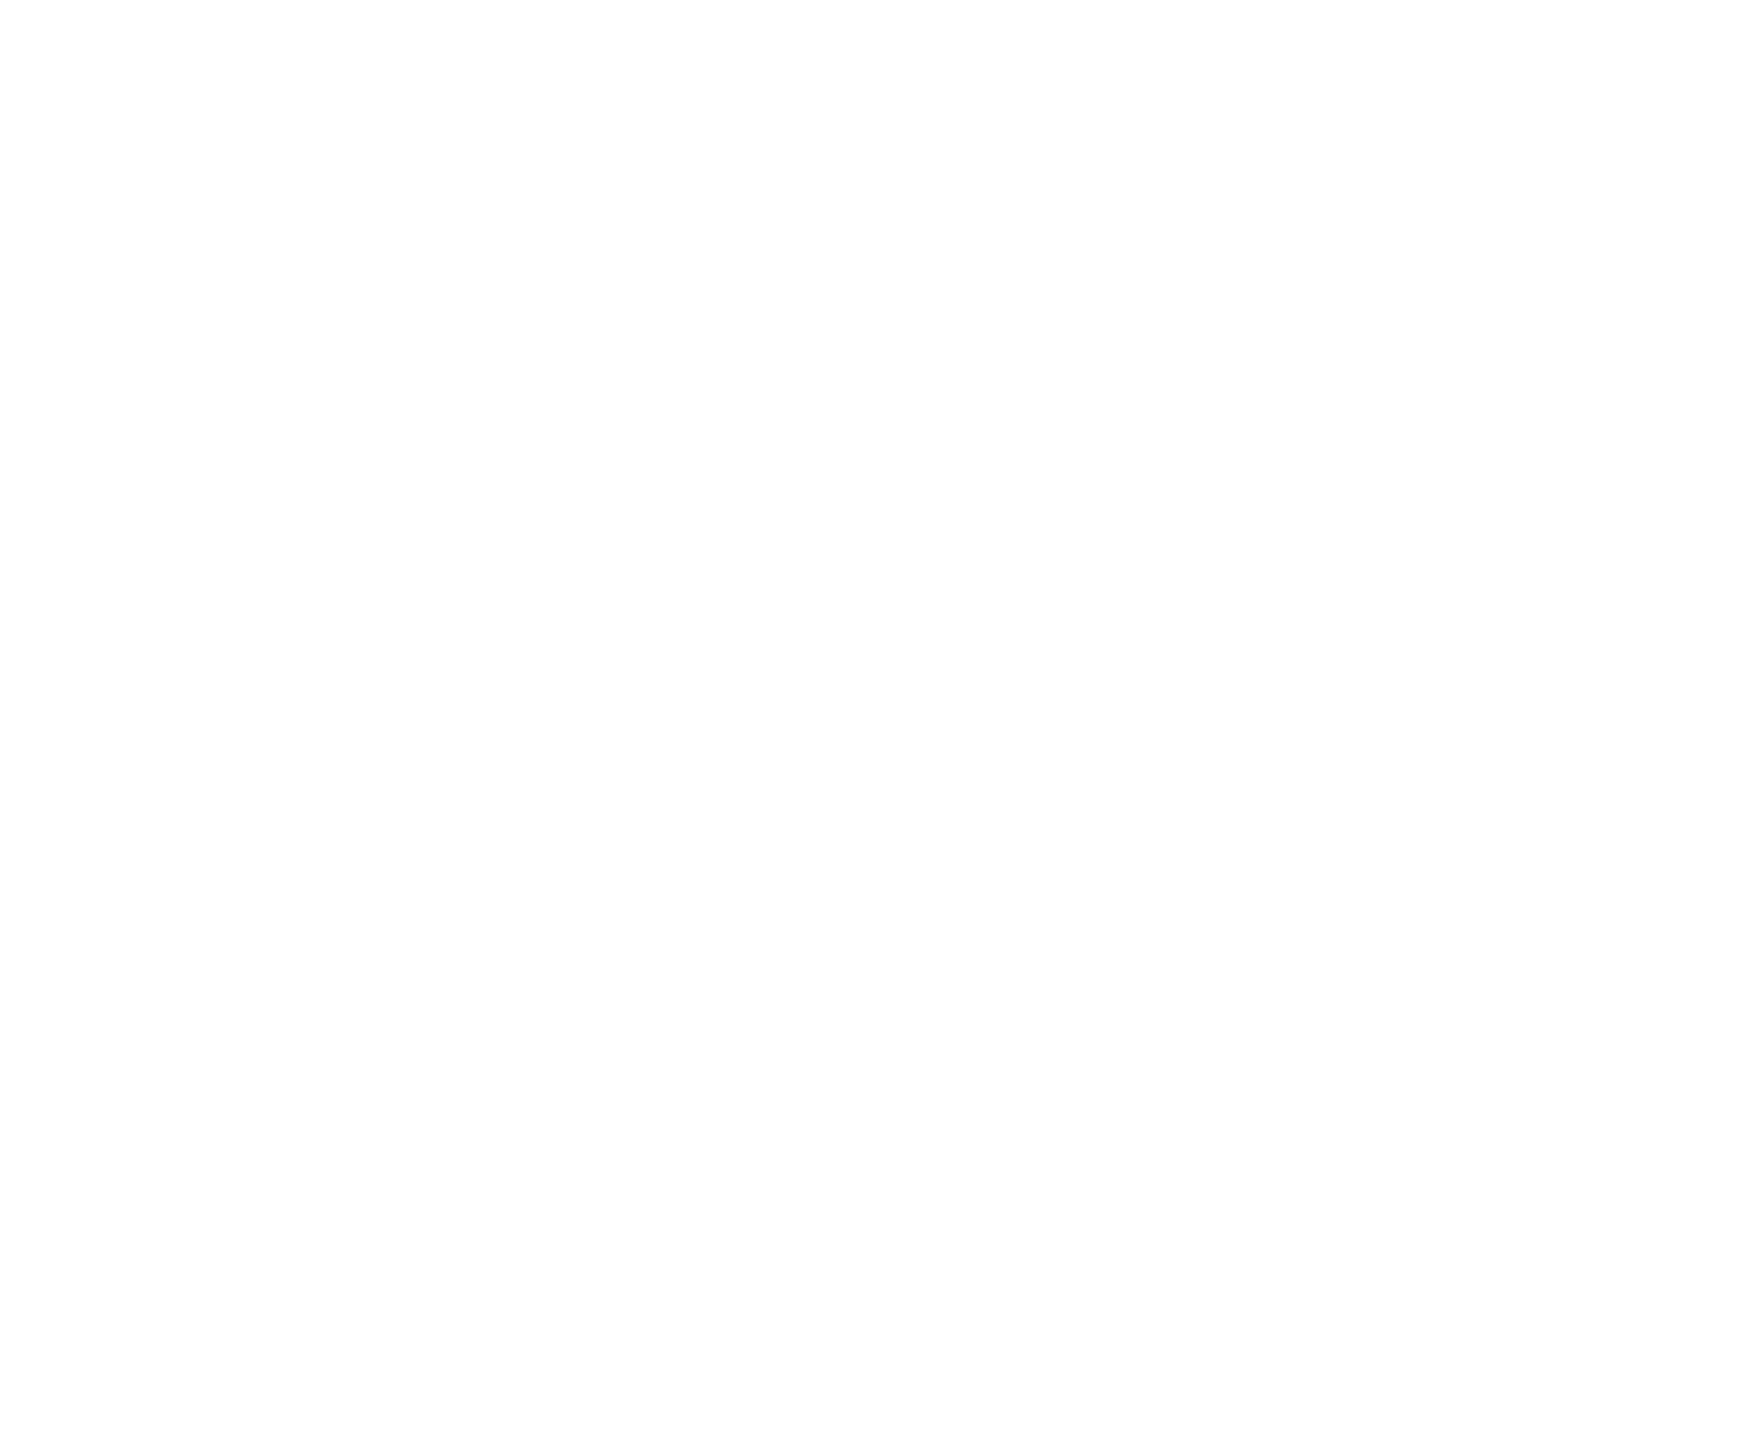 The Avalyn apartments logo in white